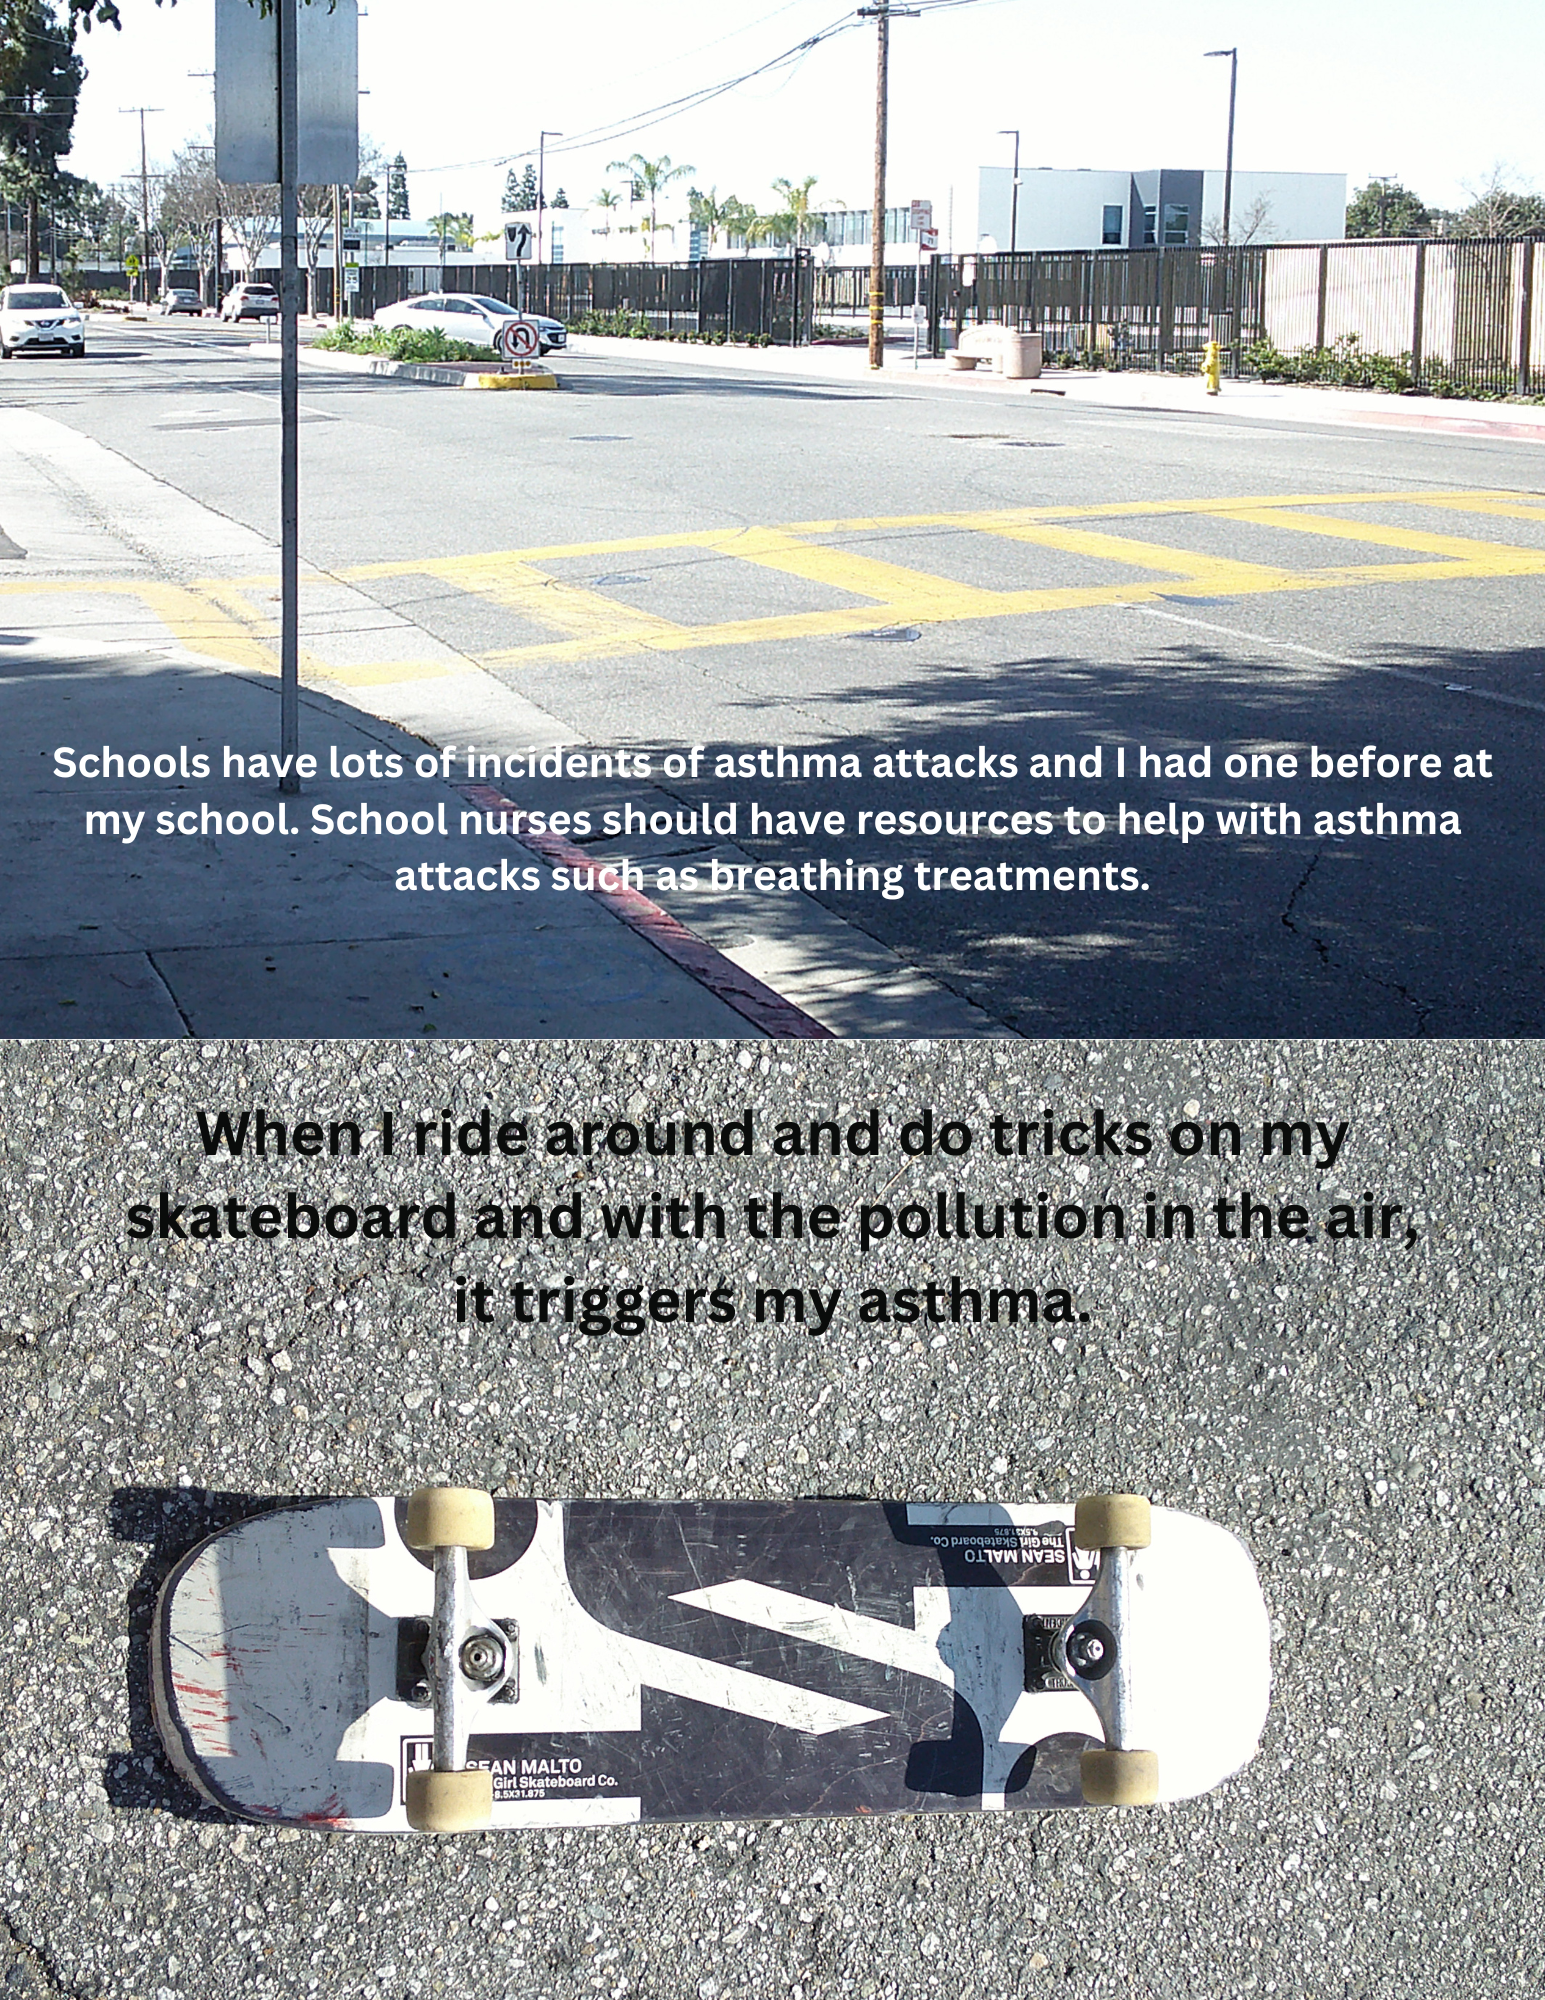 Pictured: The image is split. The top image displays a school crossing sidewalk with a railyard in the background. The sky is grey and there are several utility poles with few trees visible. The bottom image shows a client’s skateboard on top of concrete. Both images show indecipherable text. 